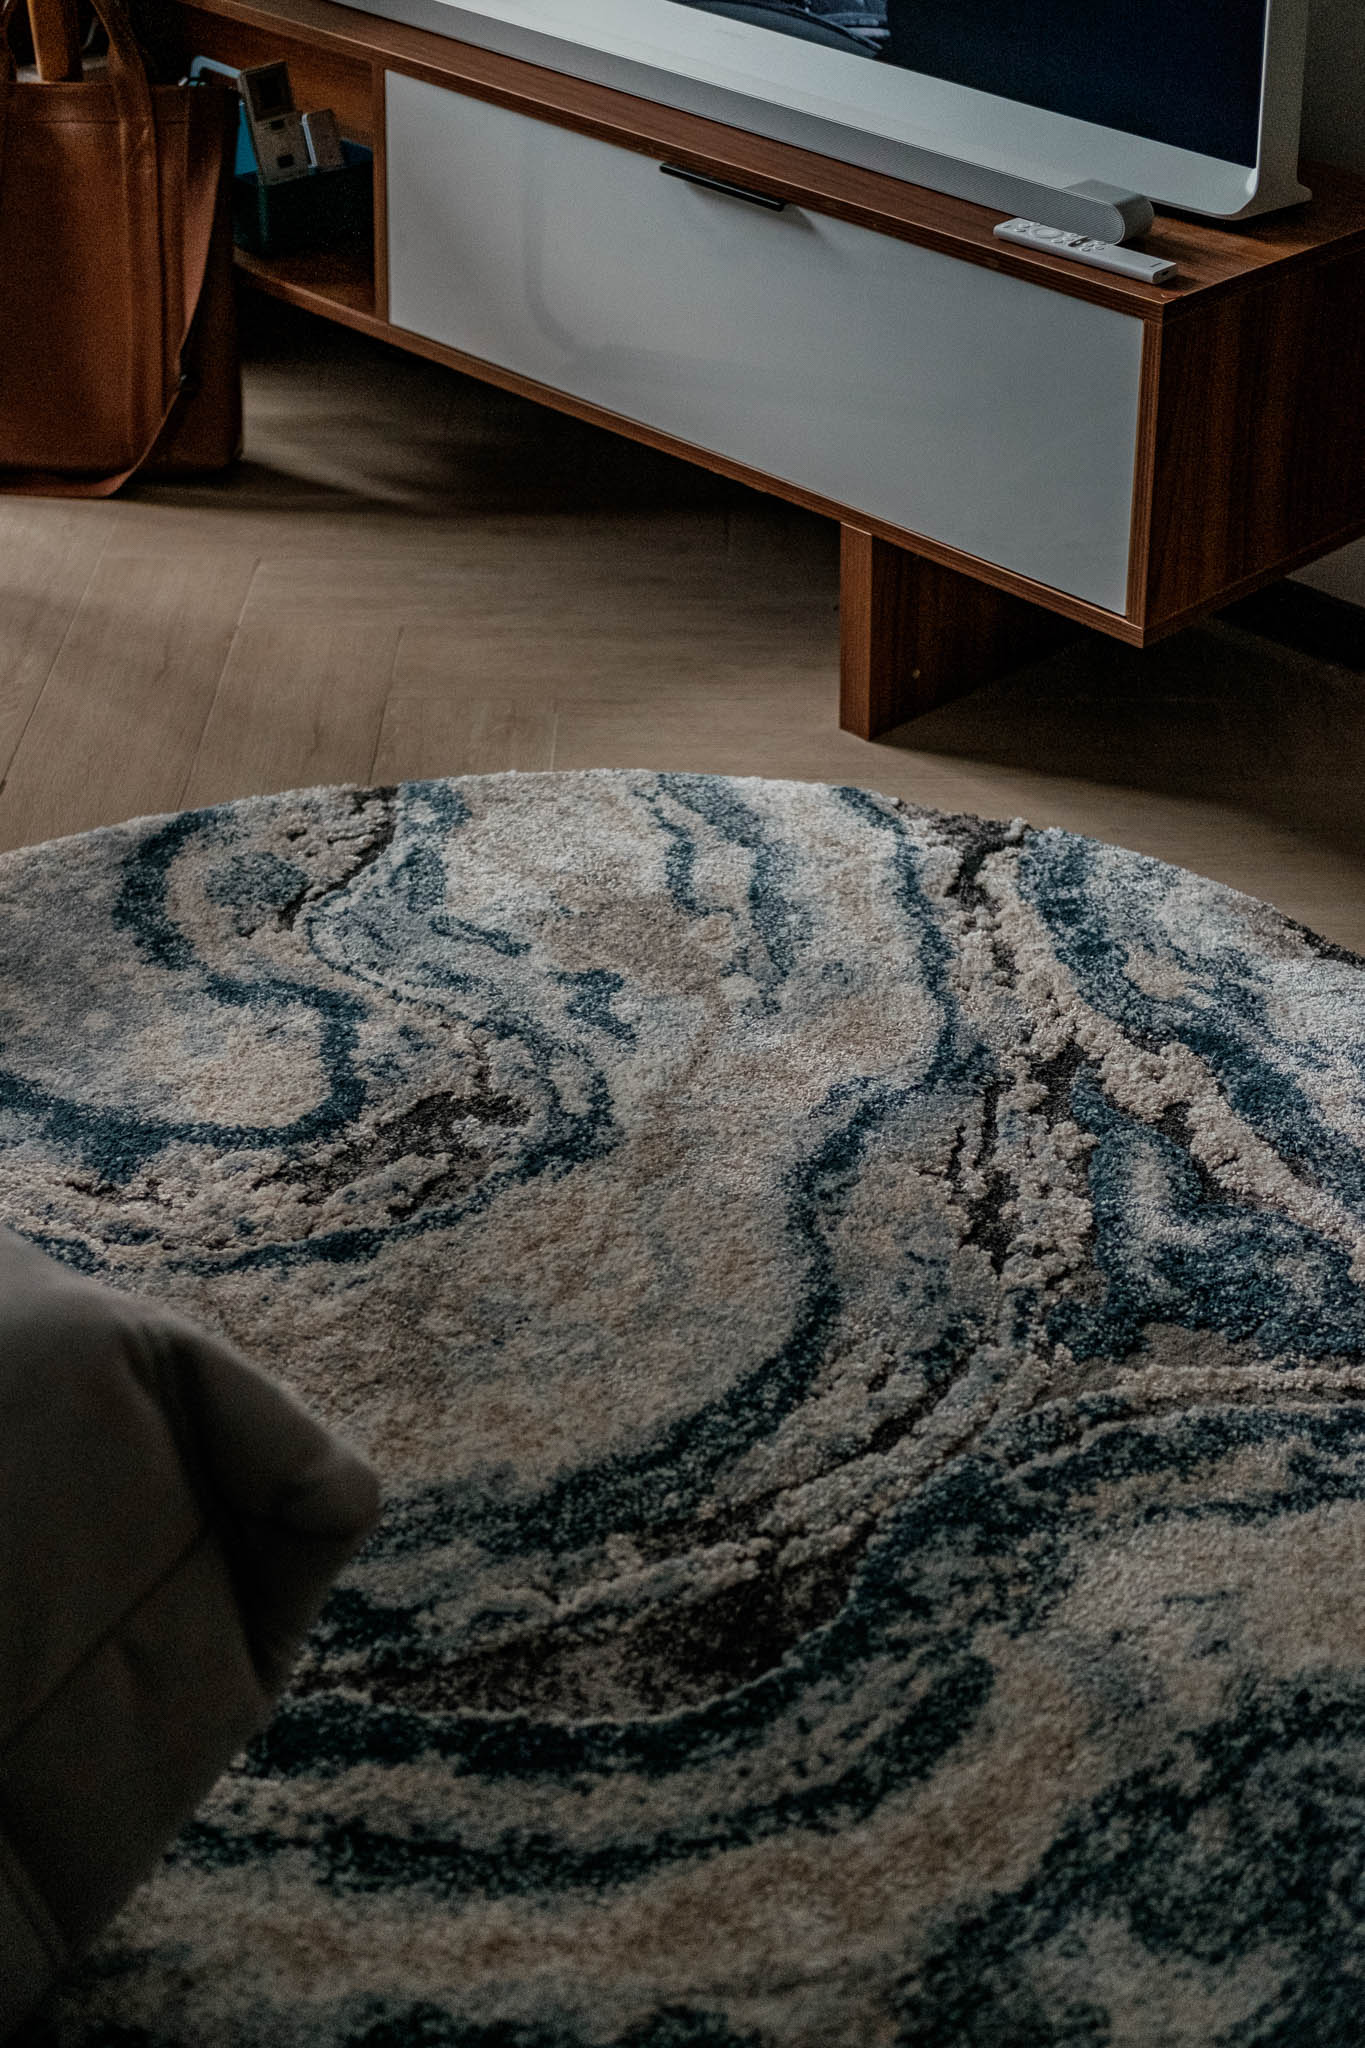 A custom marble-like rug sits at the center